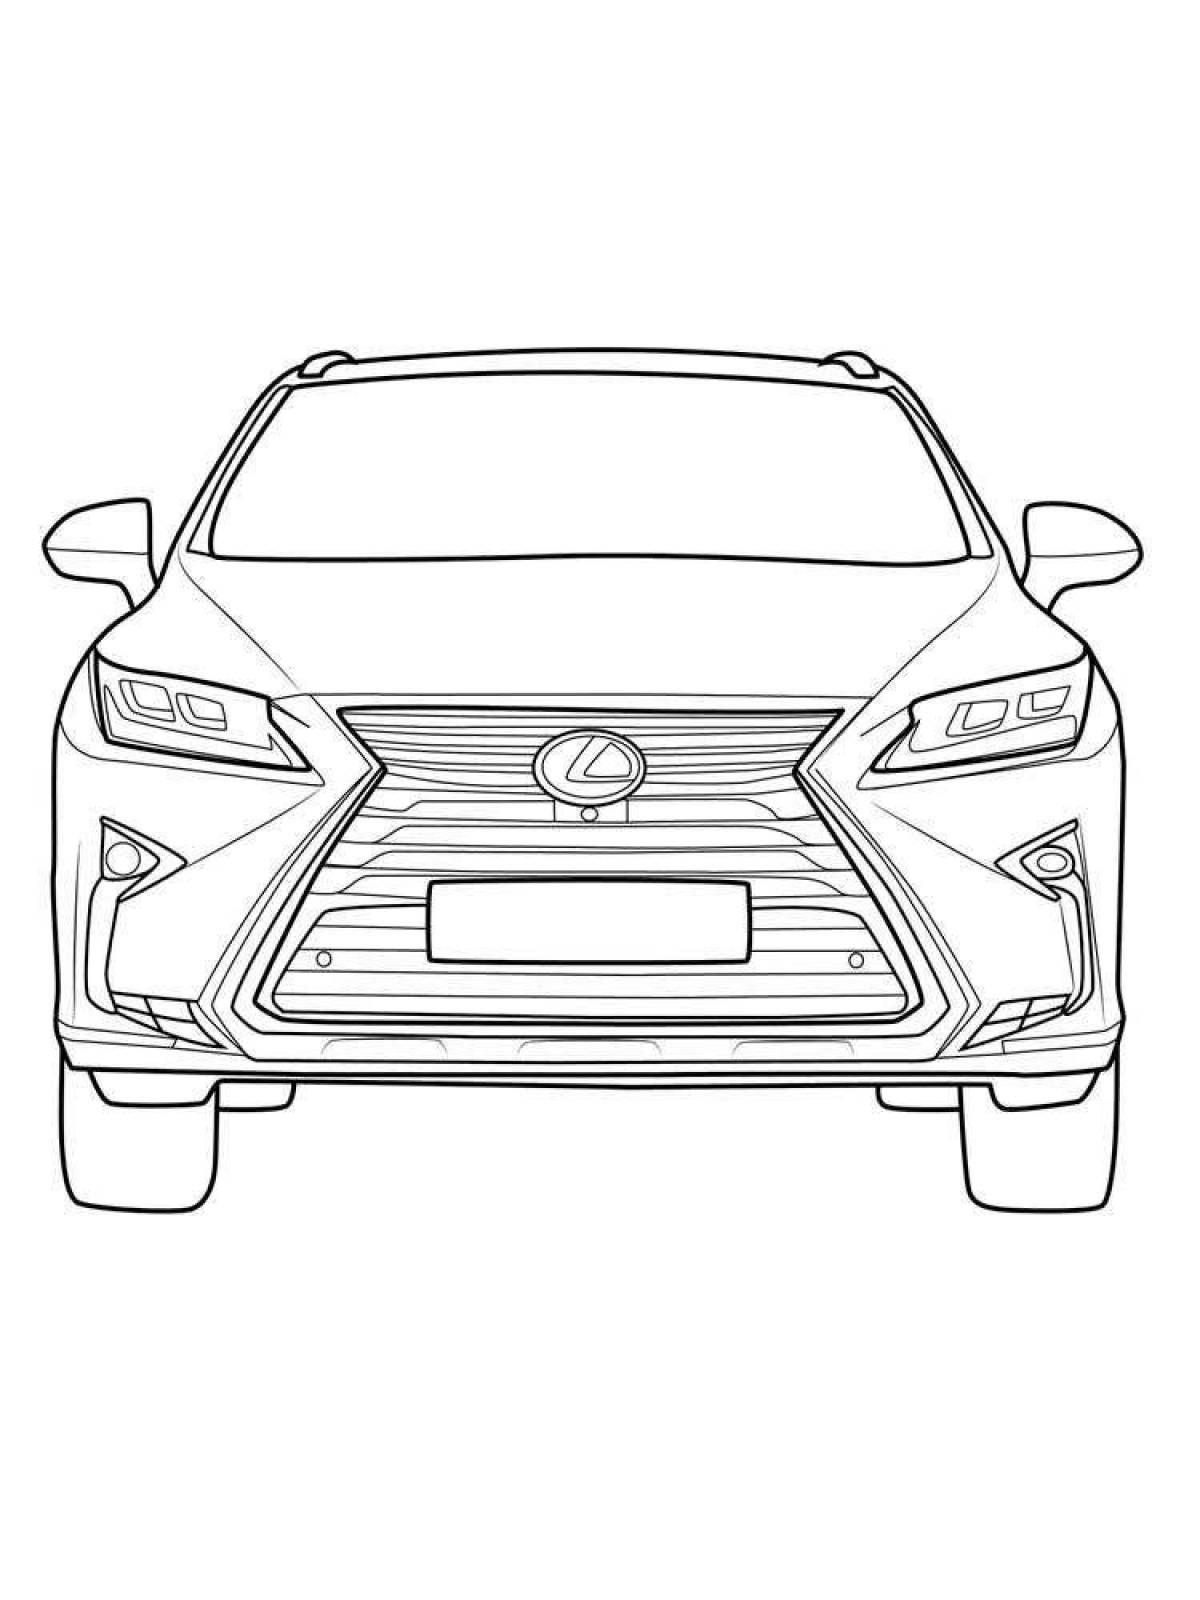 Colouring magic toyota camry